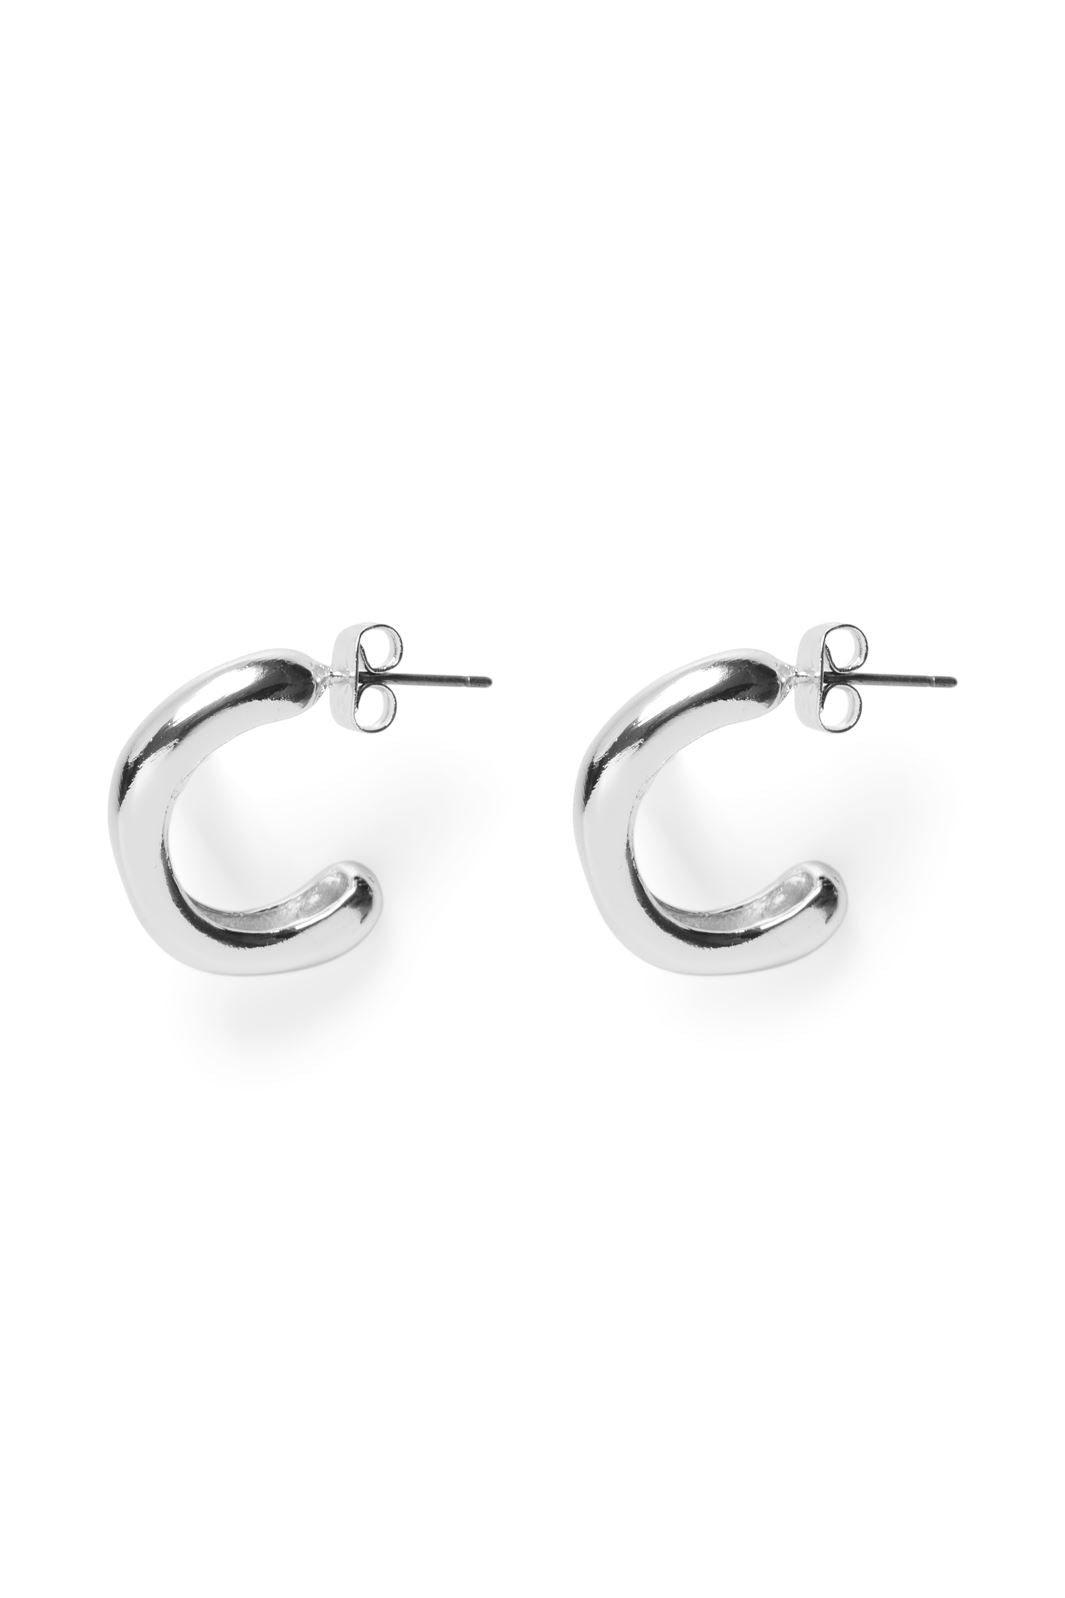 Pieces - Pcmivo Hoop Earrings Box Flow - 4531459 Silver Colour St2